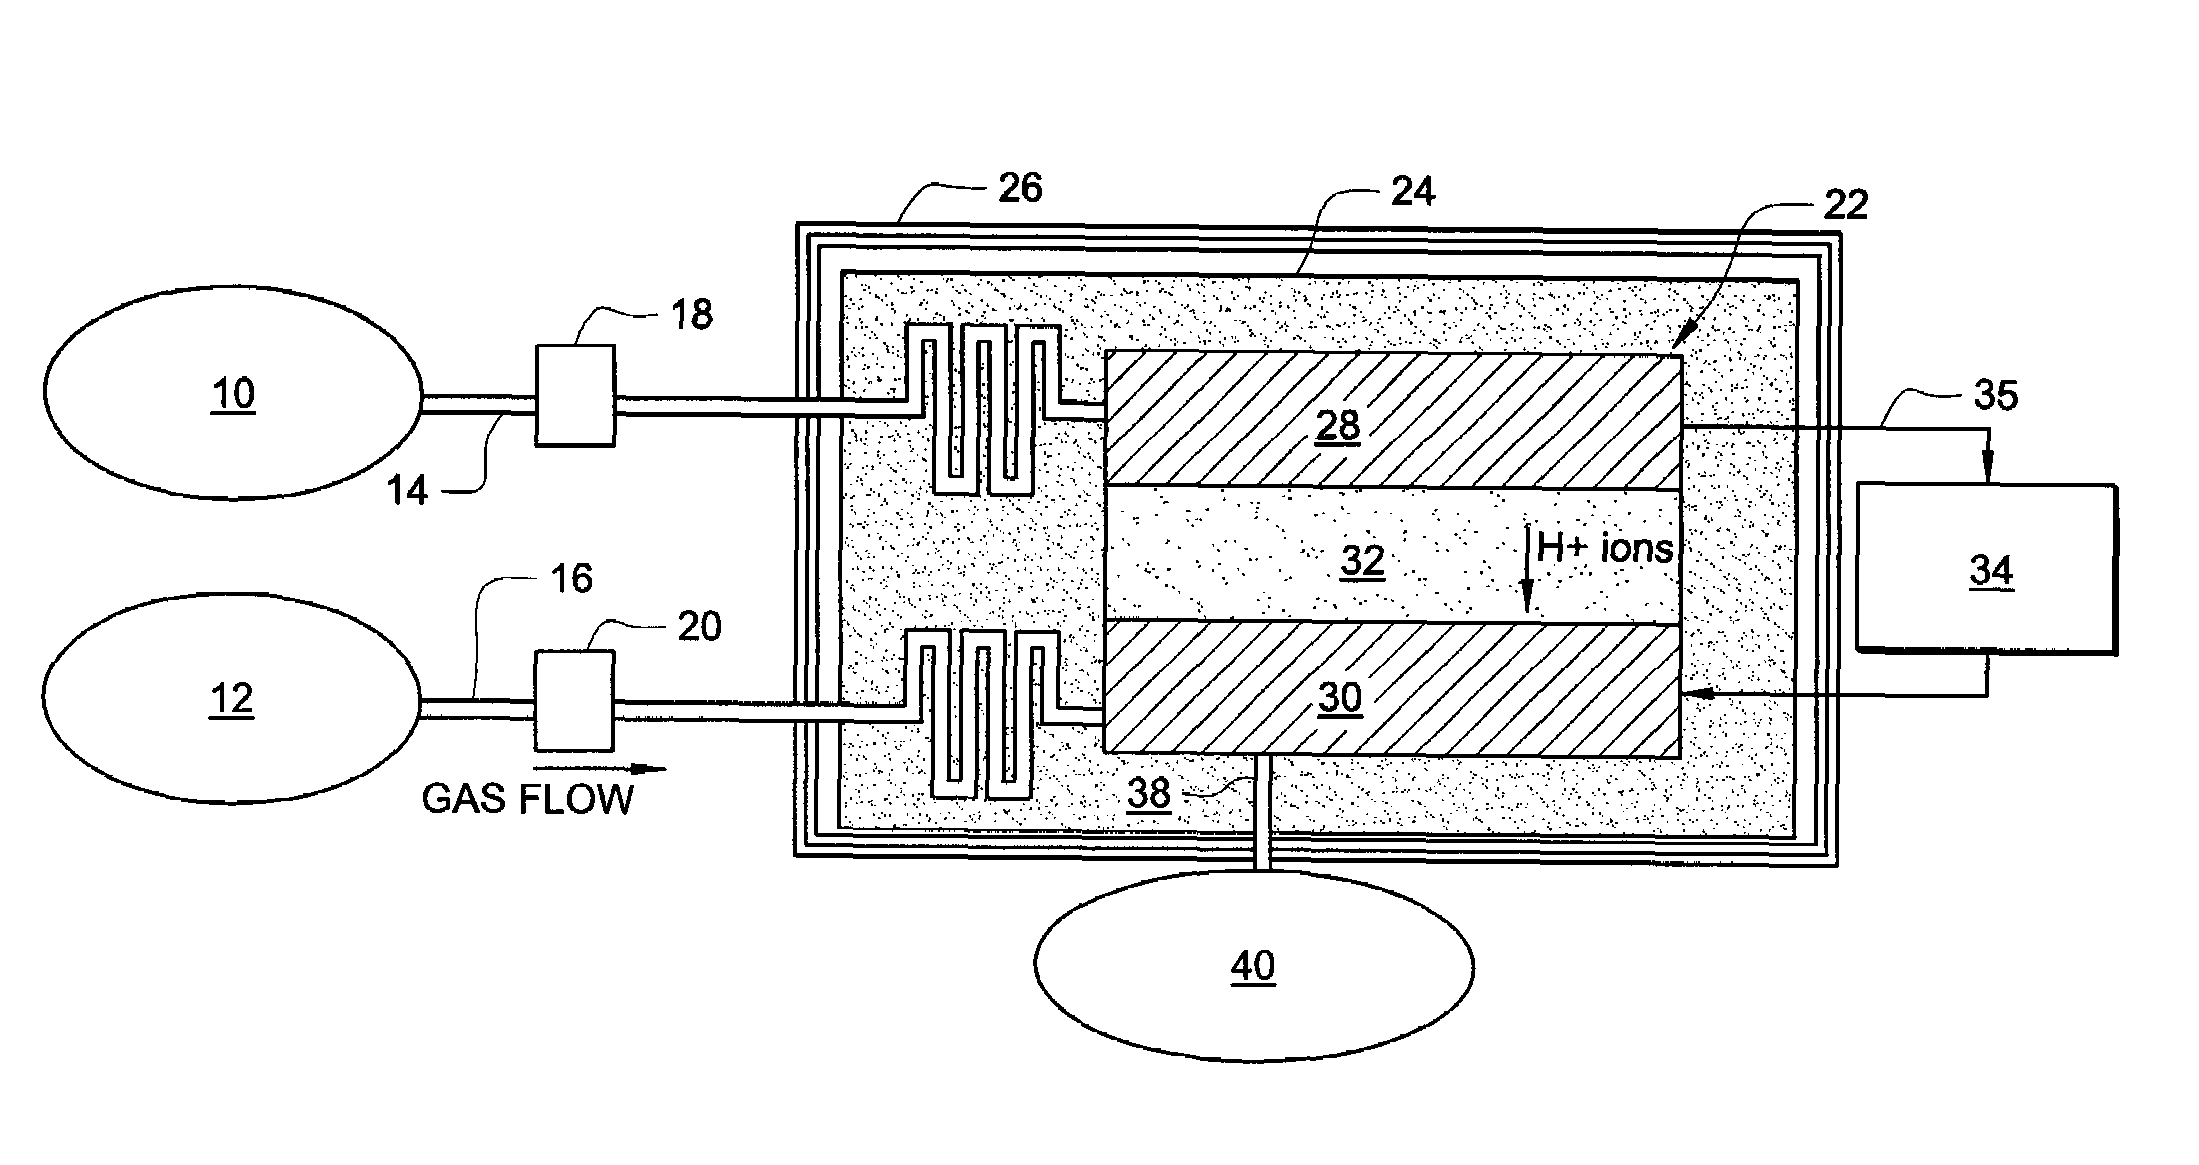 Methods of heating energy storage devices that power downhole tools